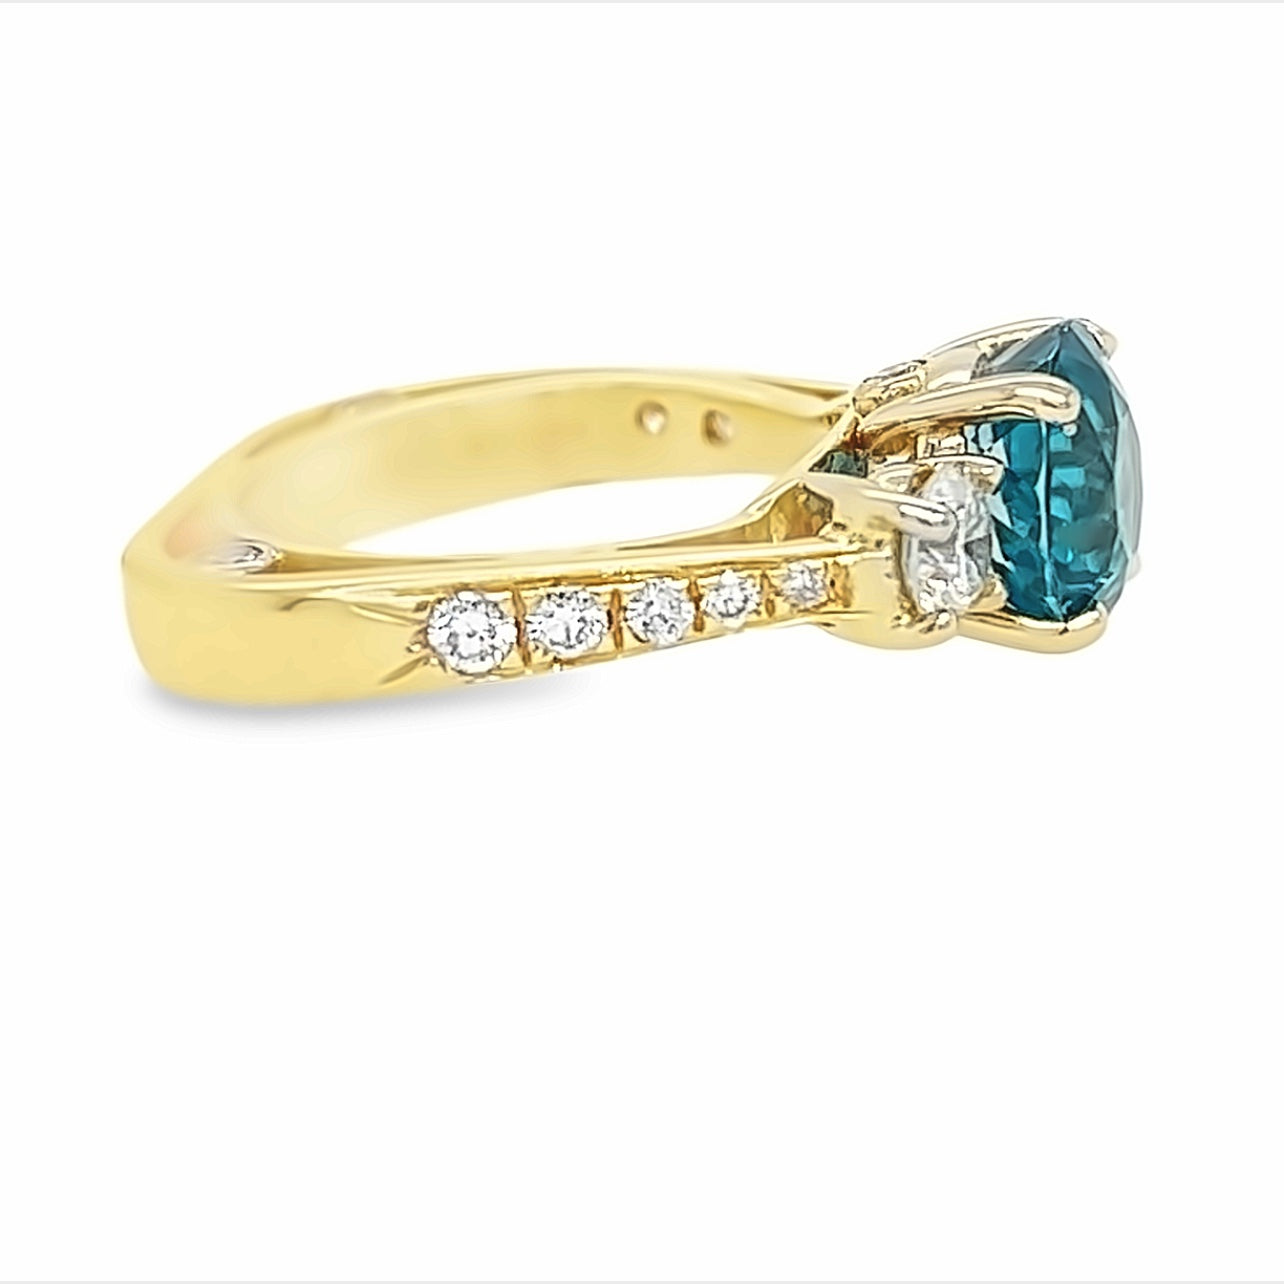 18k Yellow Gold Blue Zircon and Diamond Ring by Paul Richter